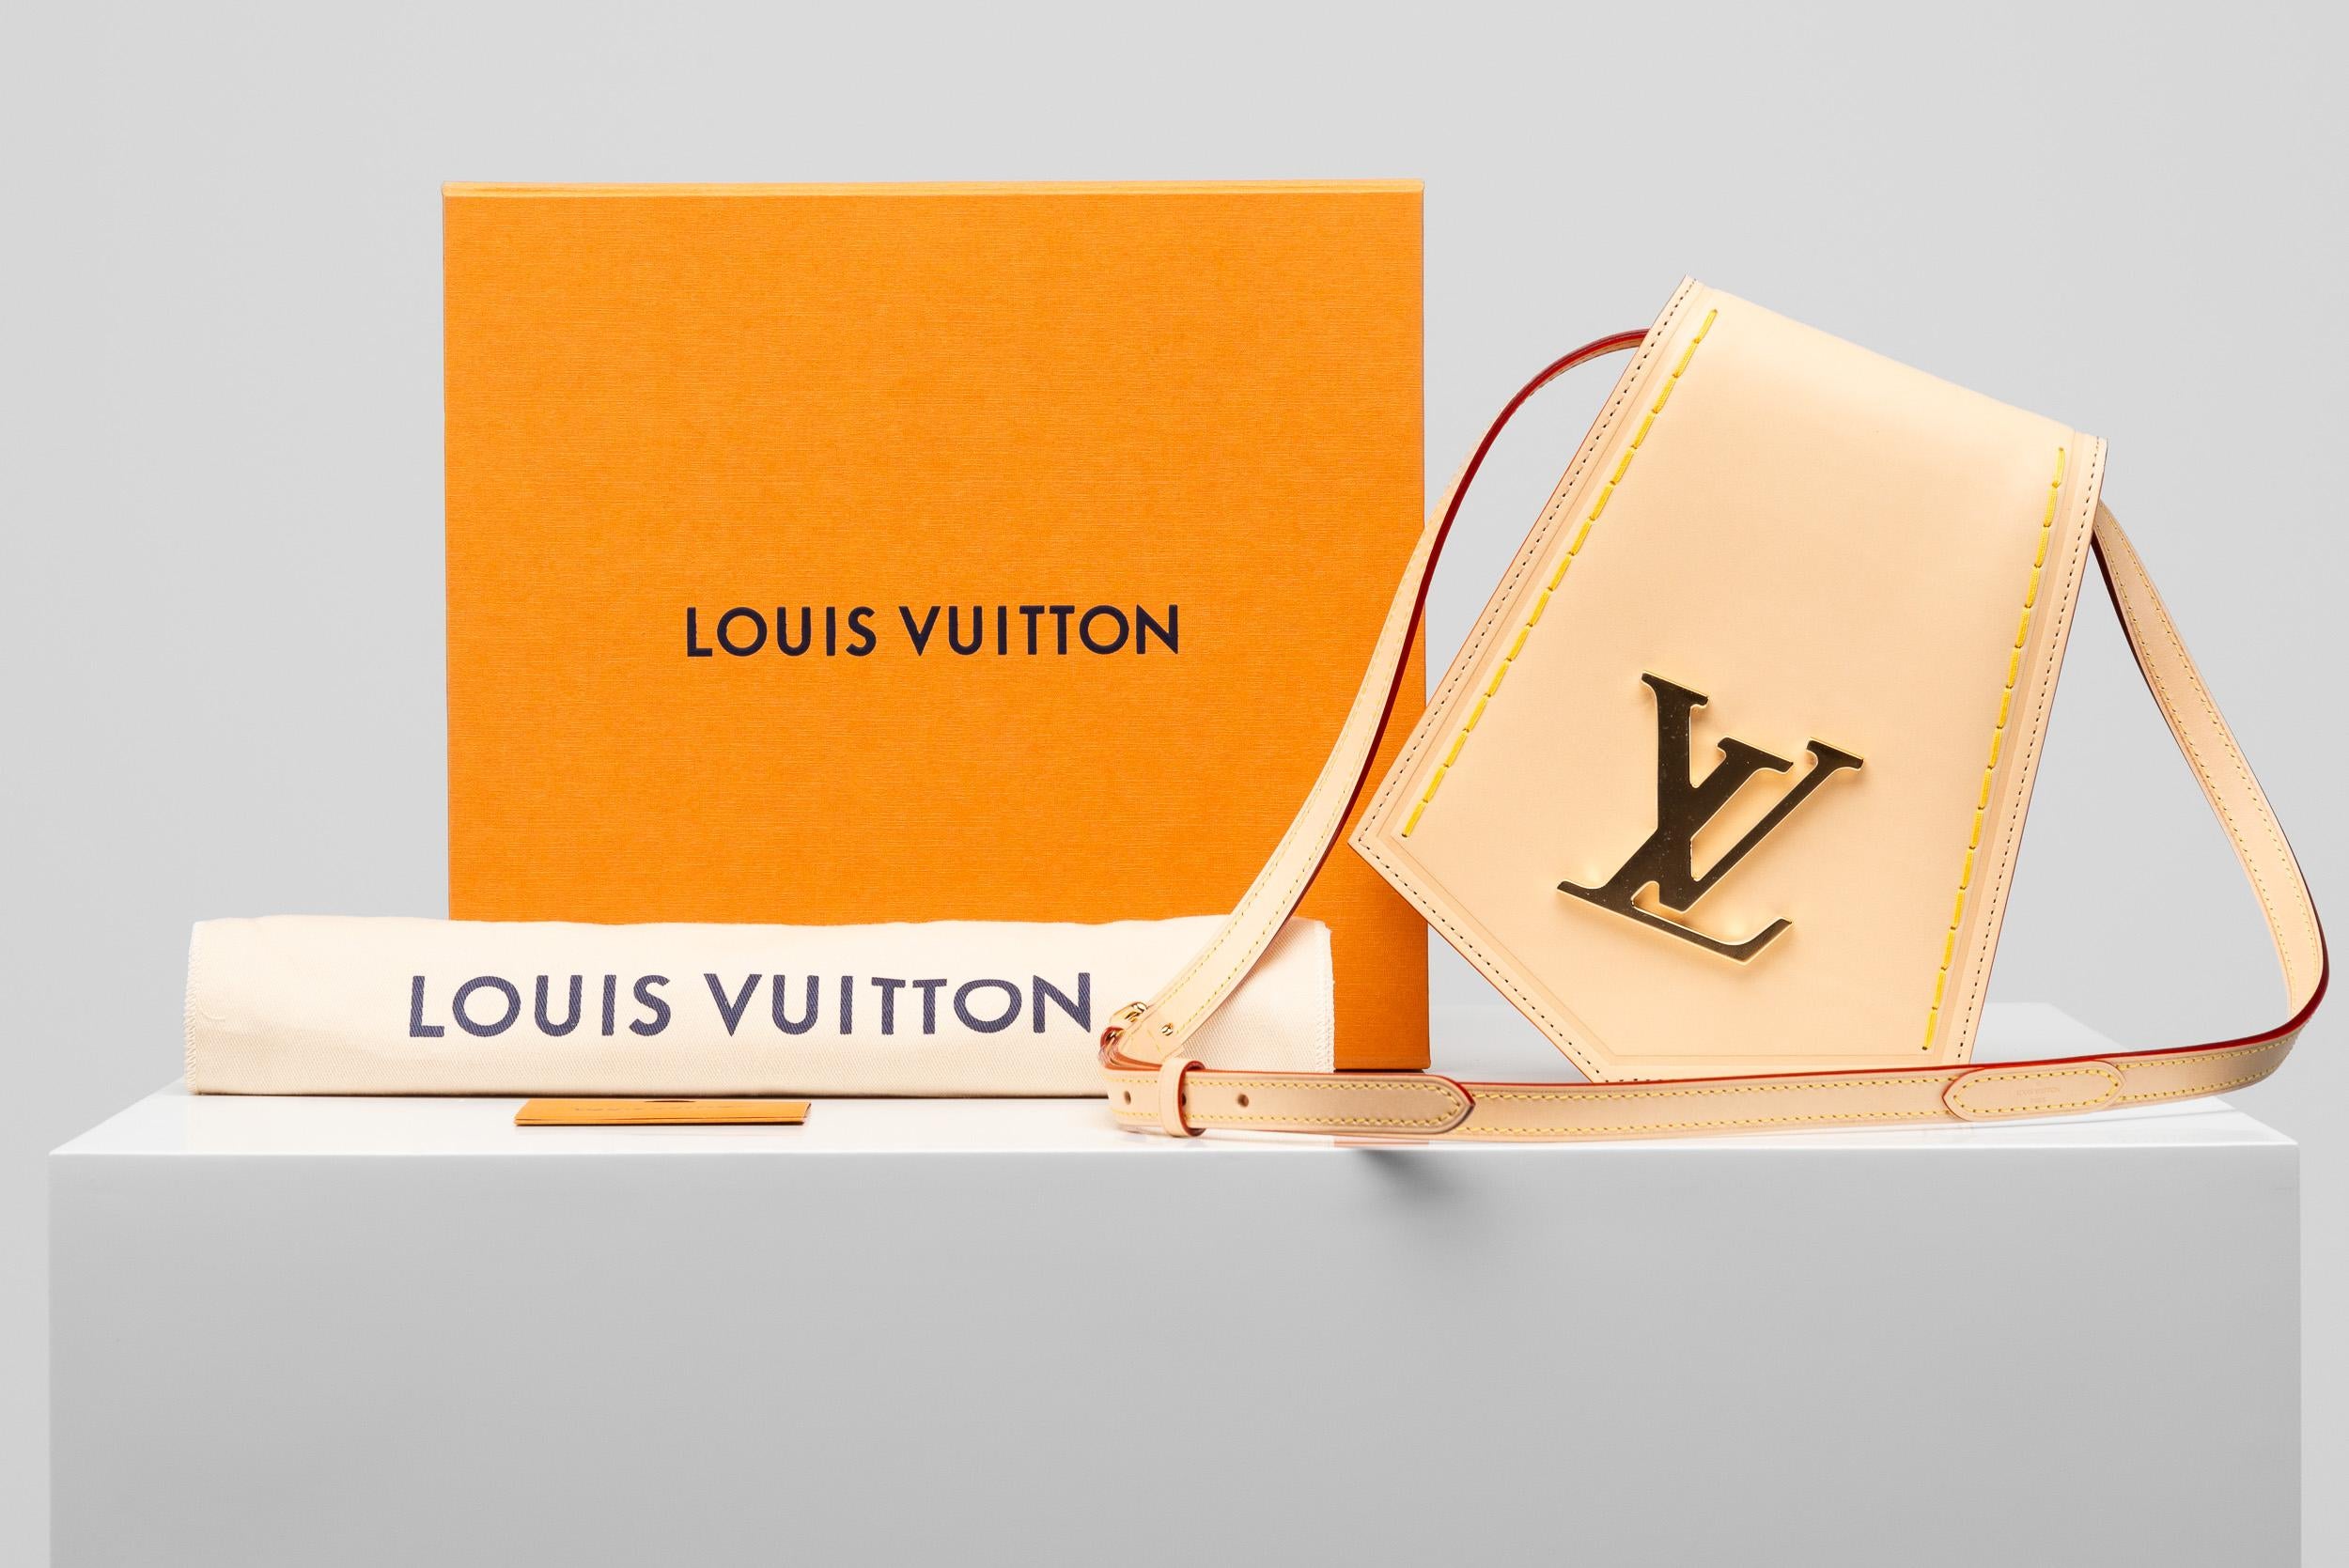 From the collection of SAVINETI we offer this Louis Vuitton Key Bell XL Bag:
- Brand: Louis Vuitton
- Model: Key Bell XL
- Year: 2023
- Condition: NEW (unused)
- Materials: natural cowhide leather, gold-color hardware
- Extras: Full-Set (hologram,